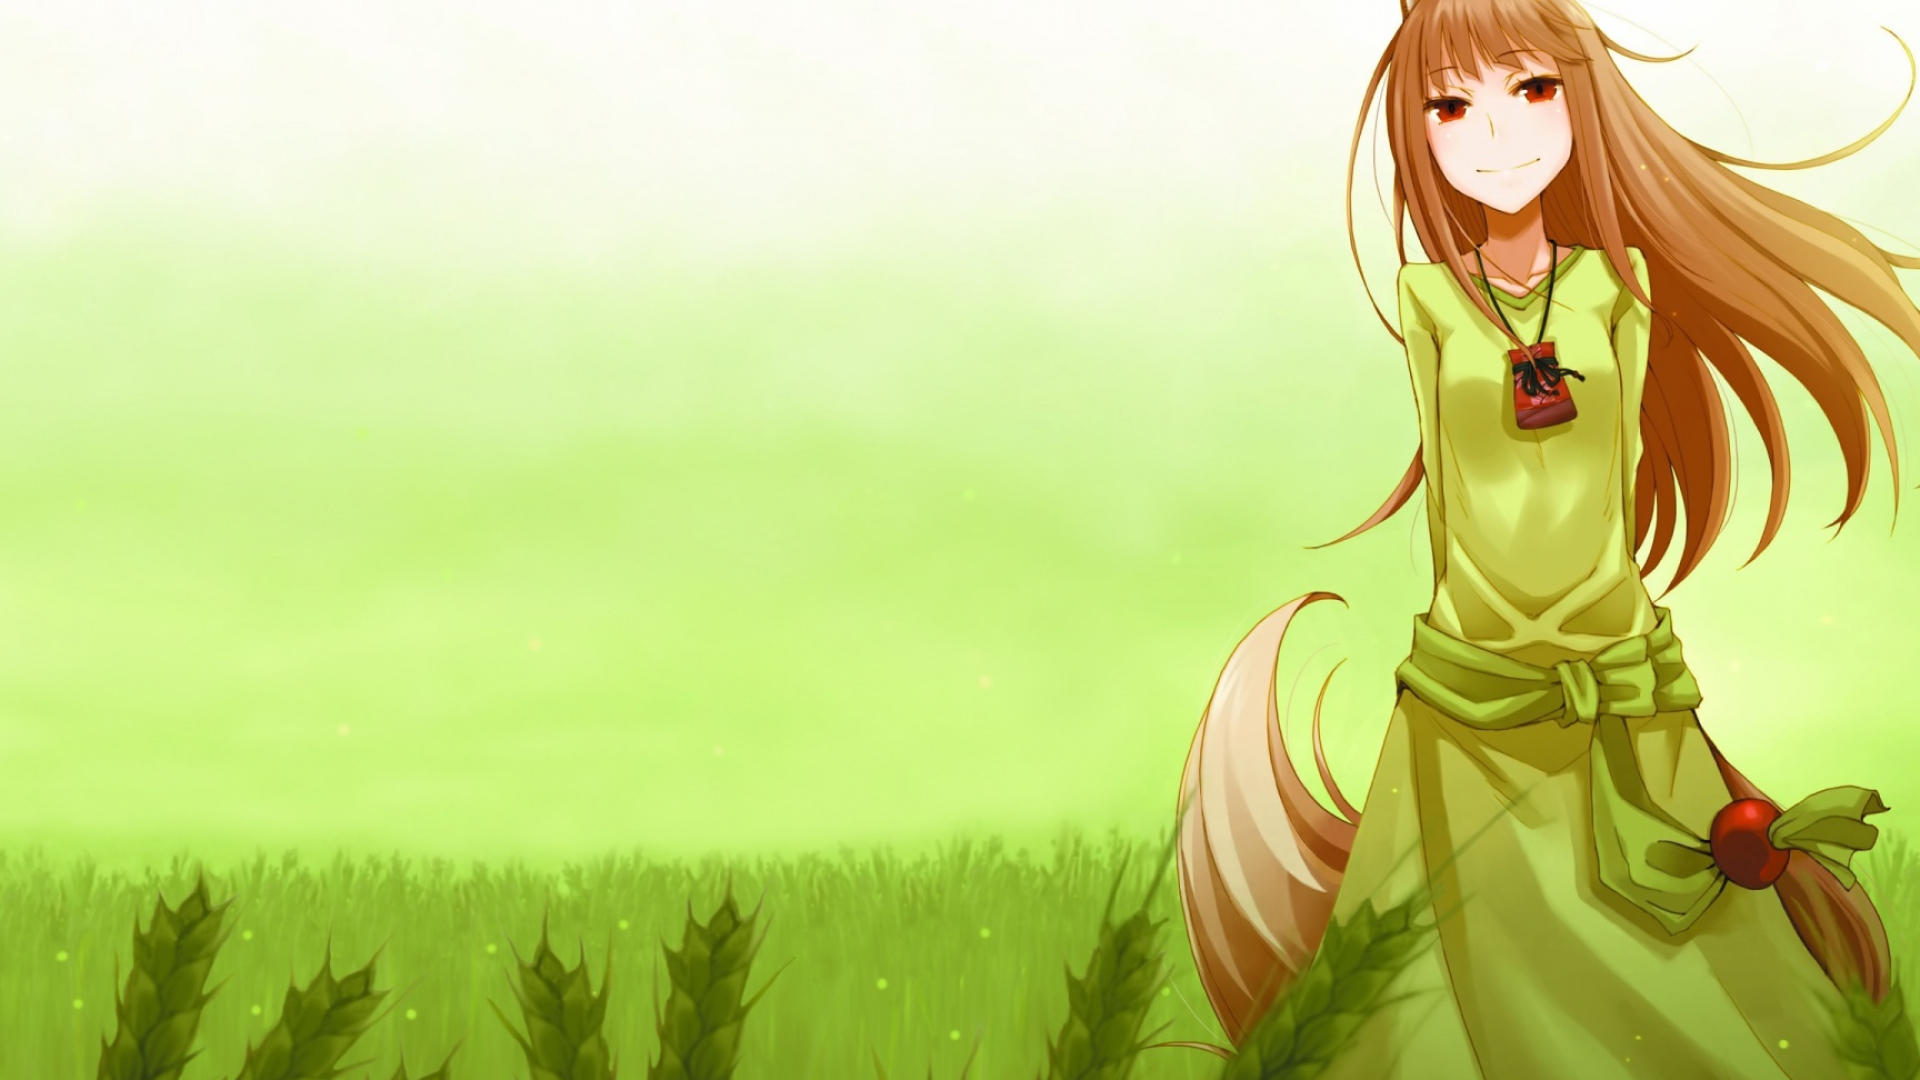 Spice and Wolf (Anime): Adventure, Fantasy, Romance, Television series directed by	Takeo Takahashi. 1920x1080 Full HD Wallpaper.